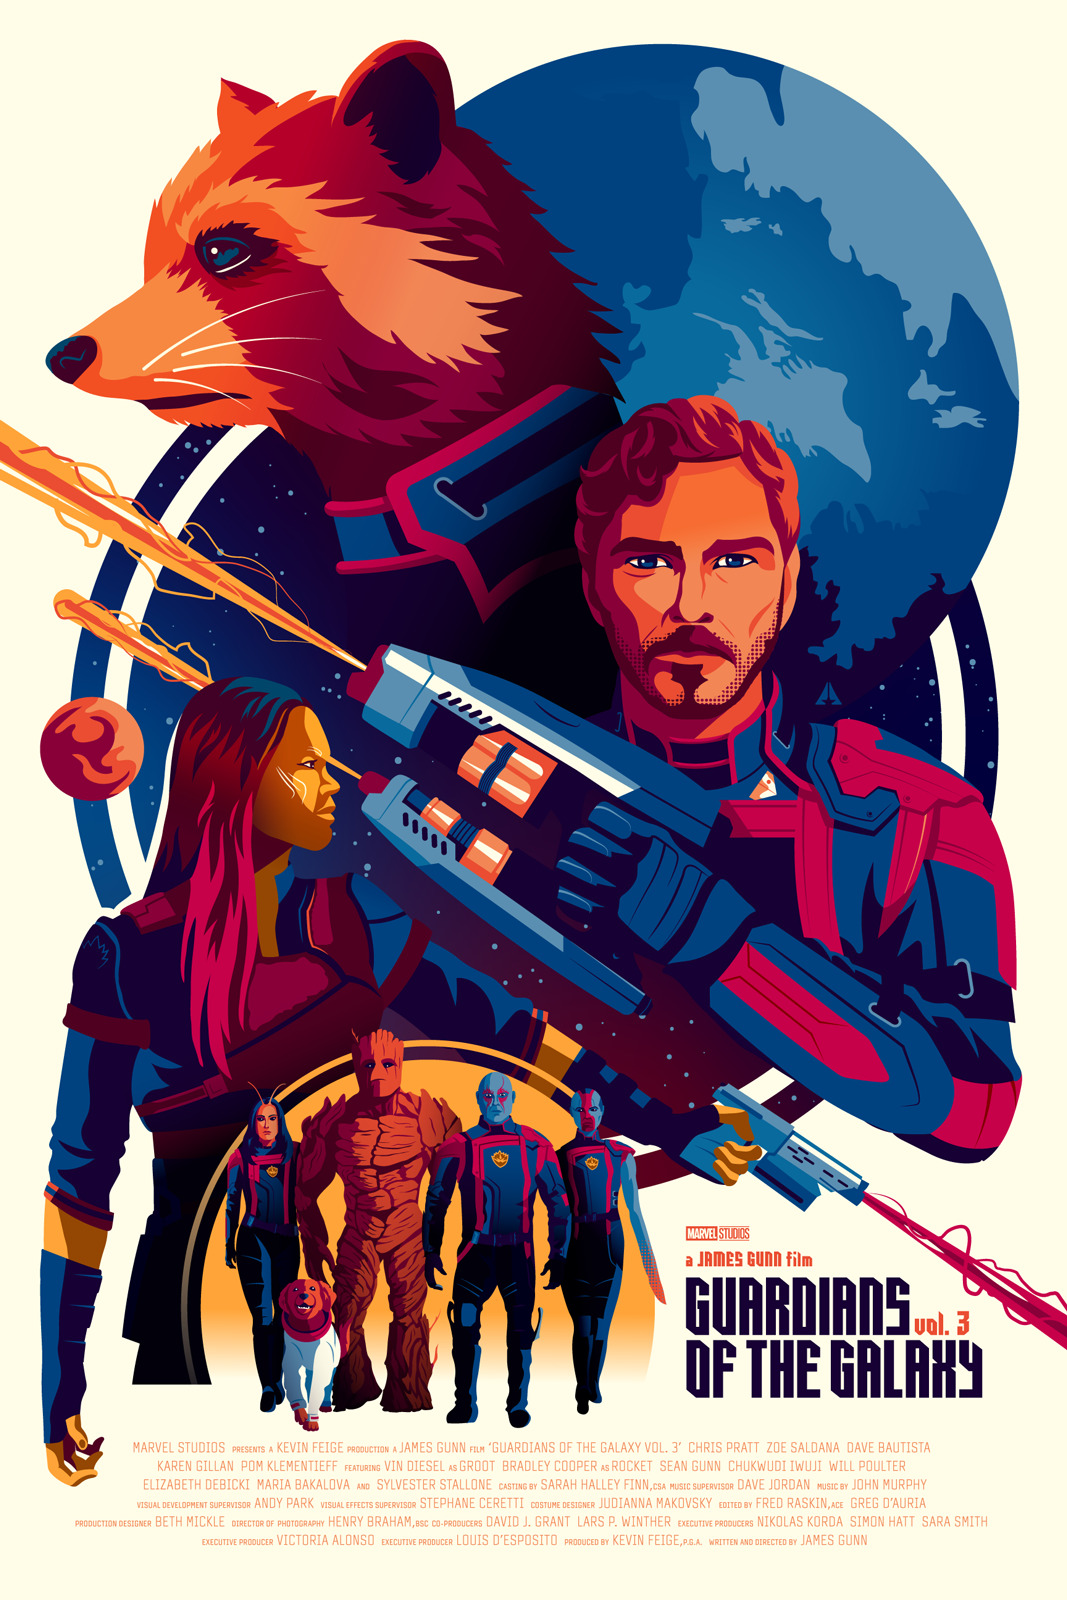 Guardians of the Galaxy Vol. 3 Tribute Poster